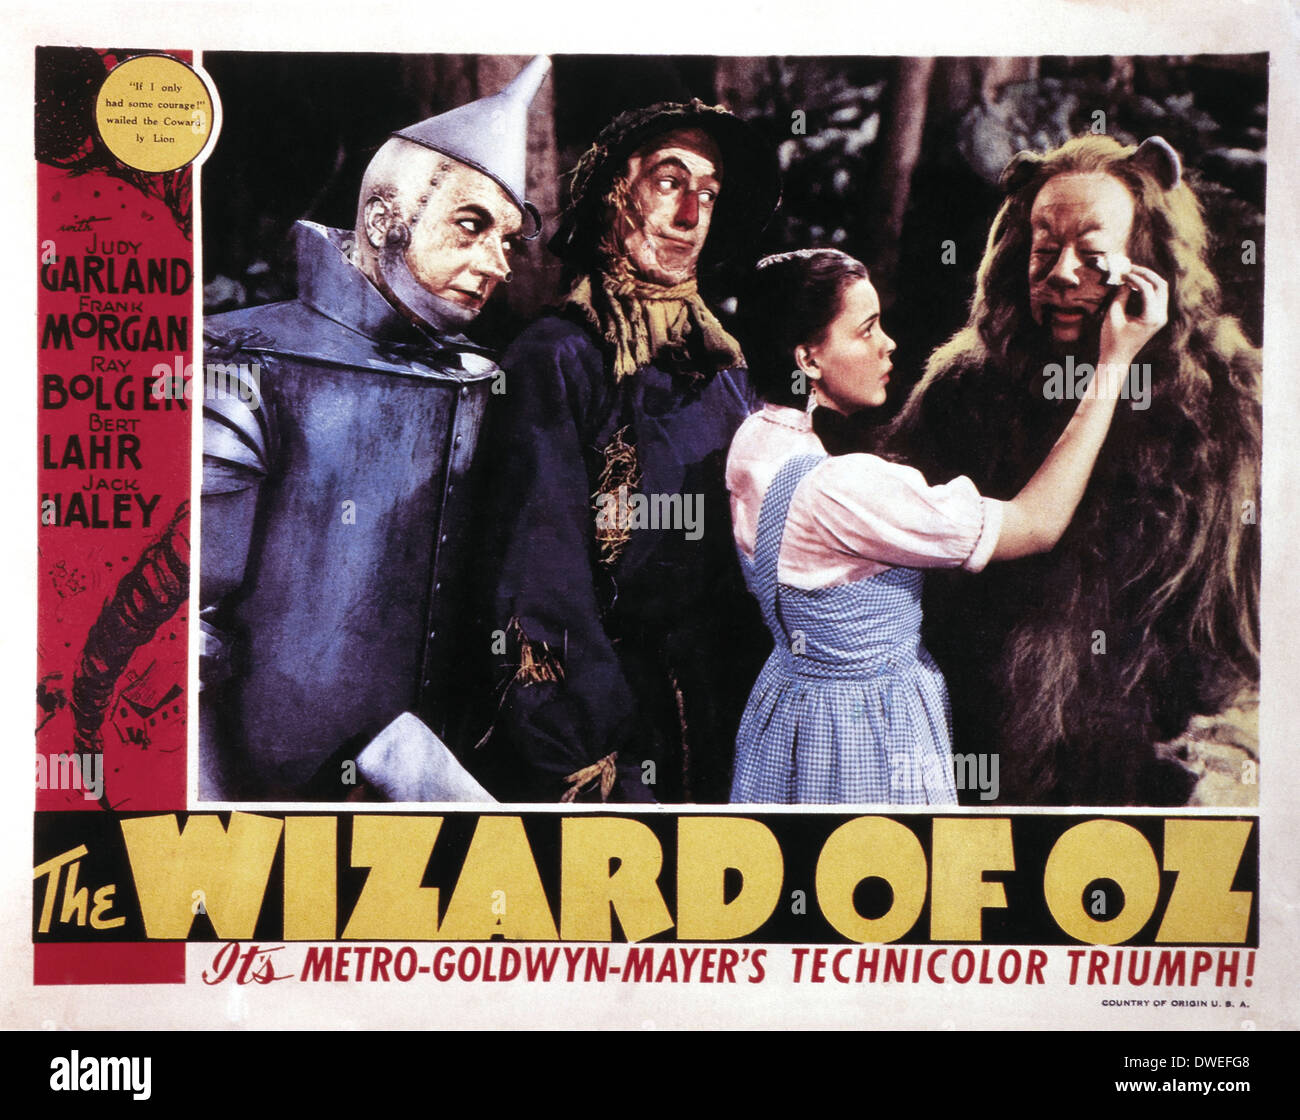 Judy Garland, Ray Bolger, Bert Lahr and Jack Haley, Movie Poster 'The Wizard of Oz', 1939 Stock Photo